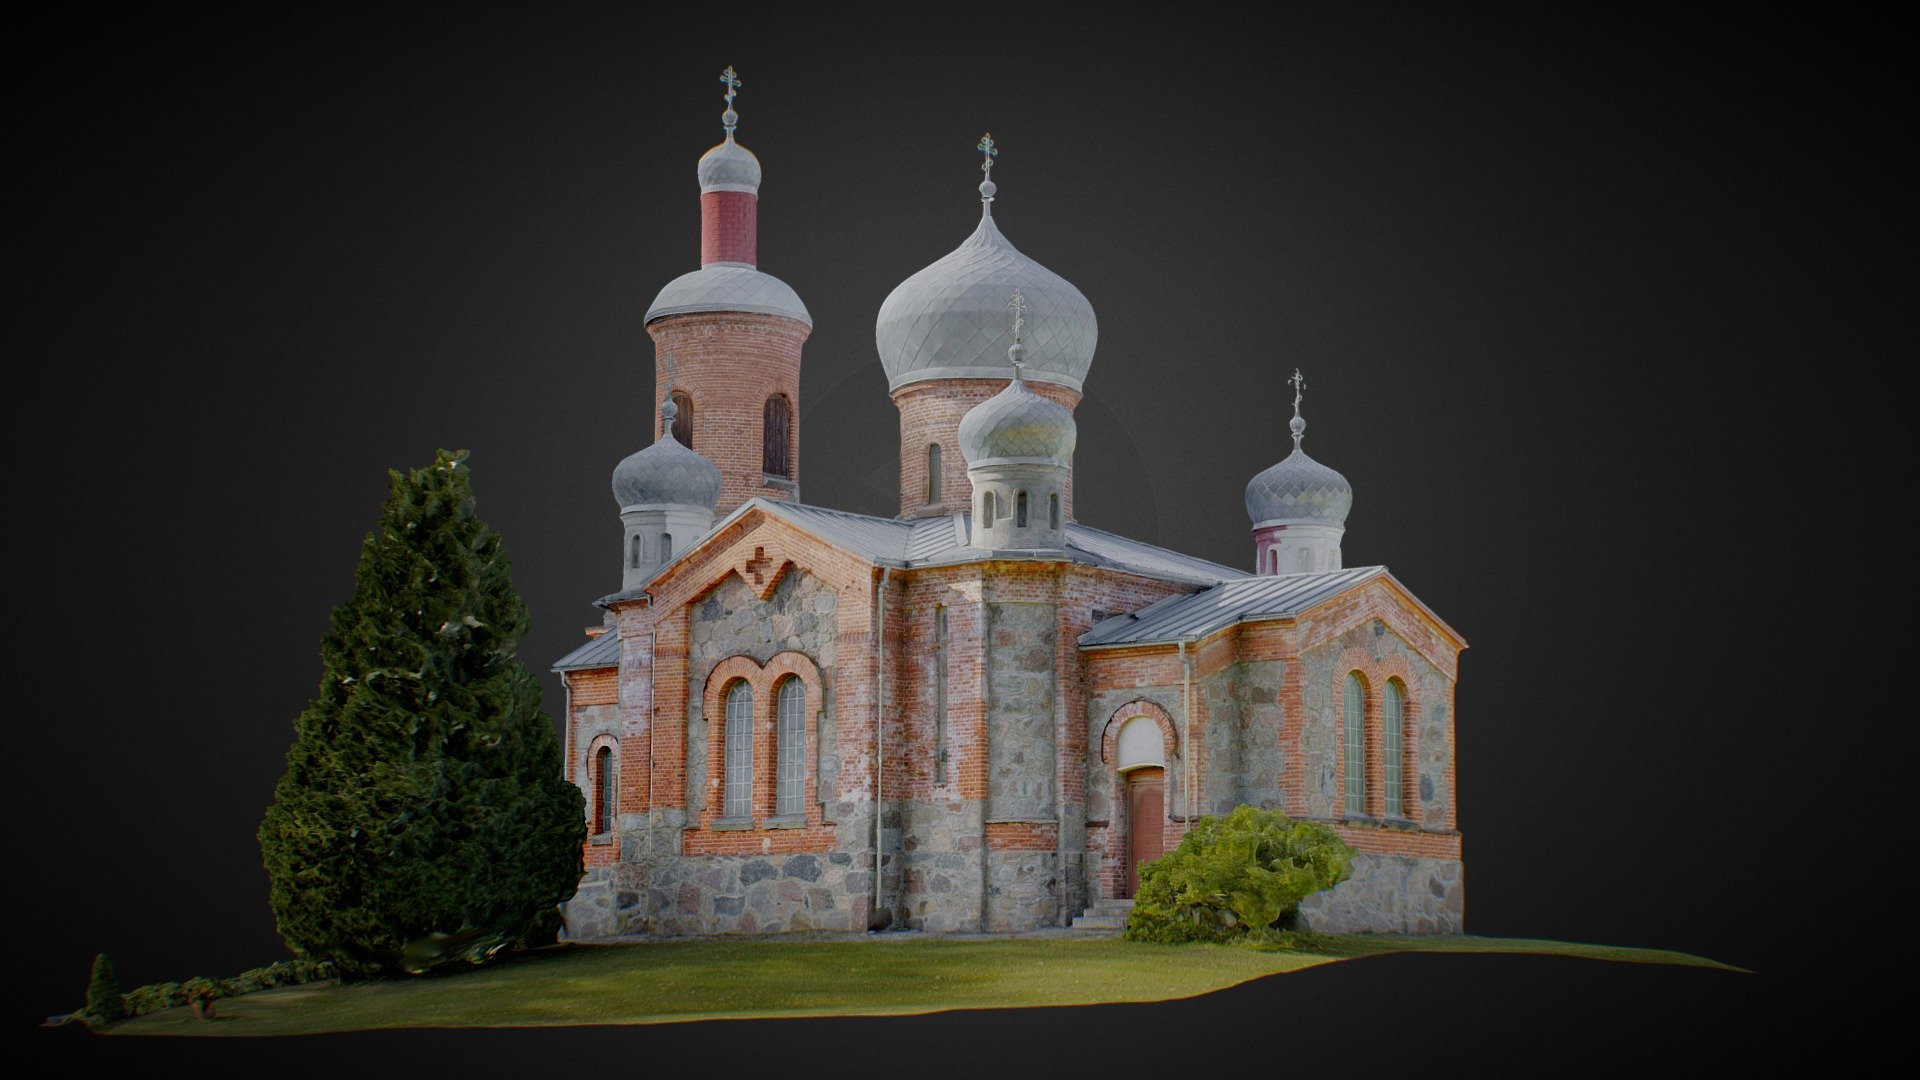 51,294 Eastern Orthodox Church Images, Stock Photos, 3D objects, & Vectors